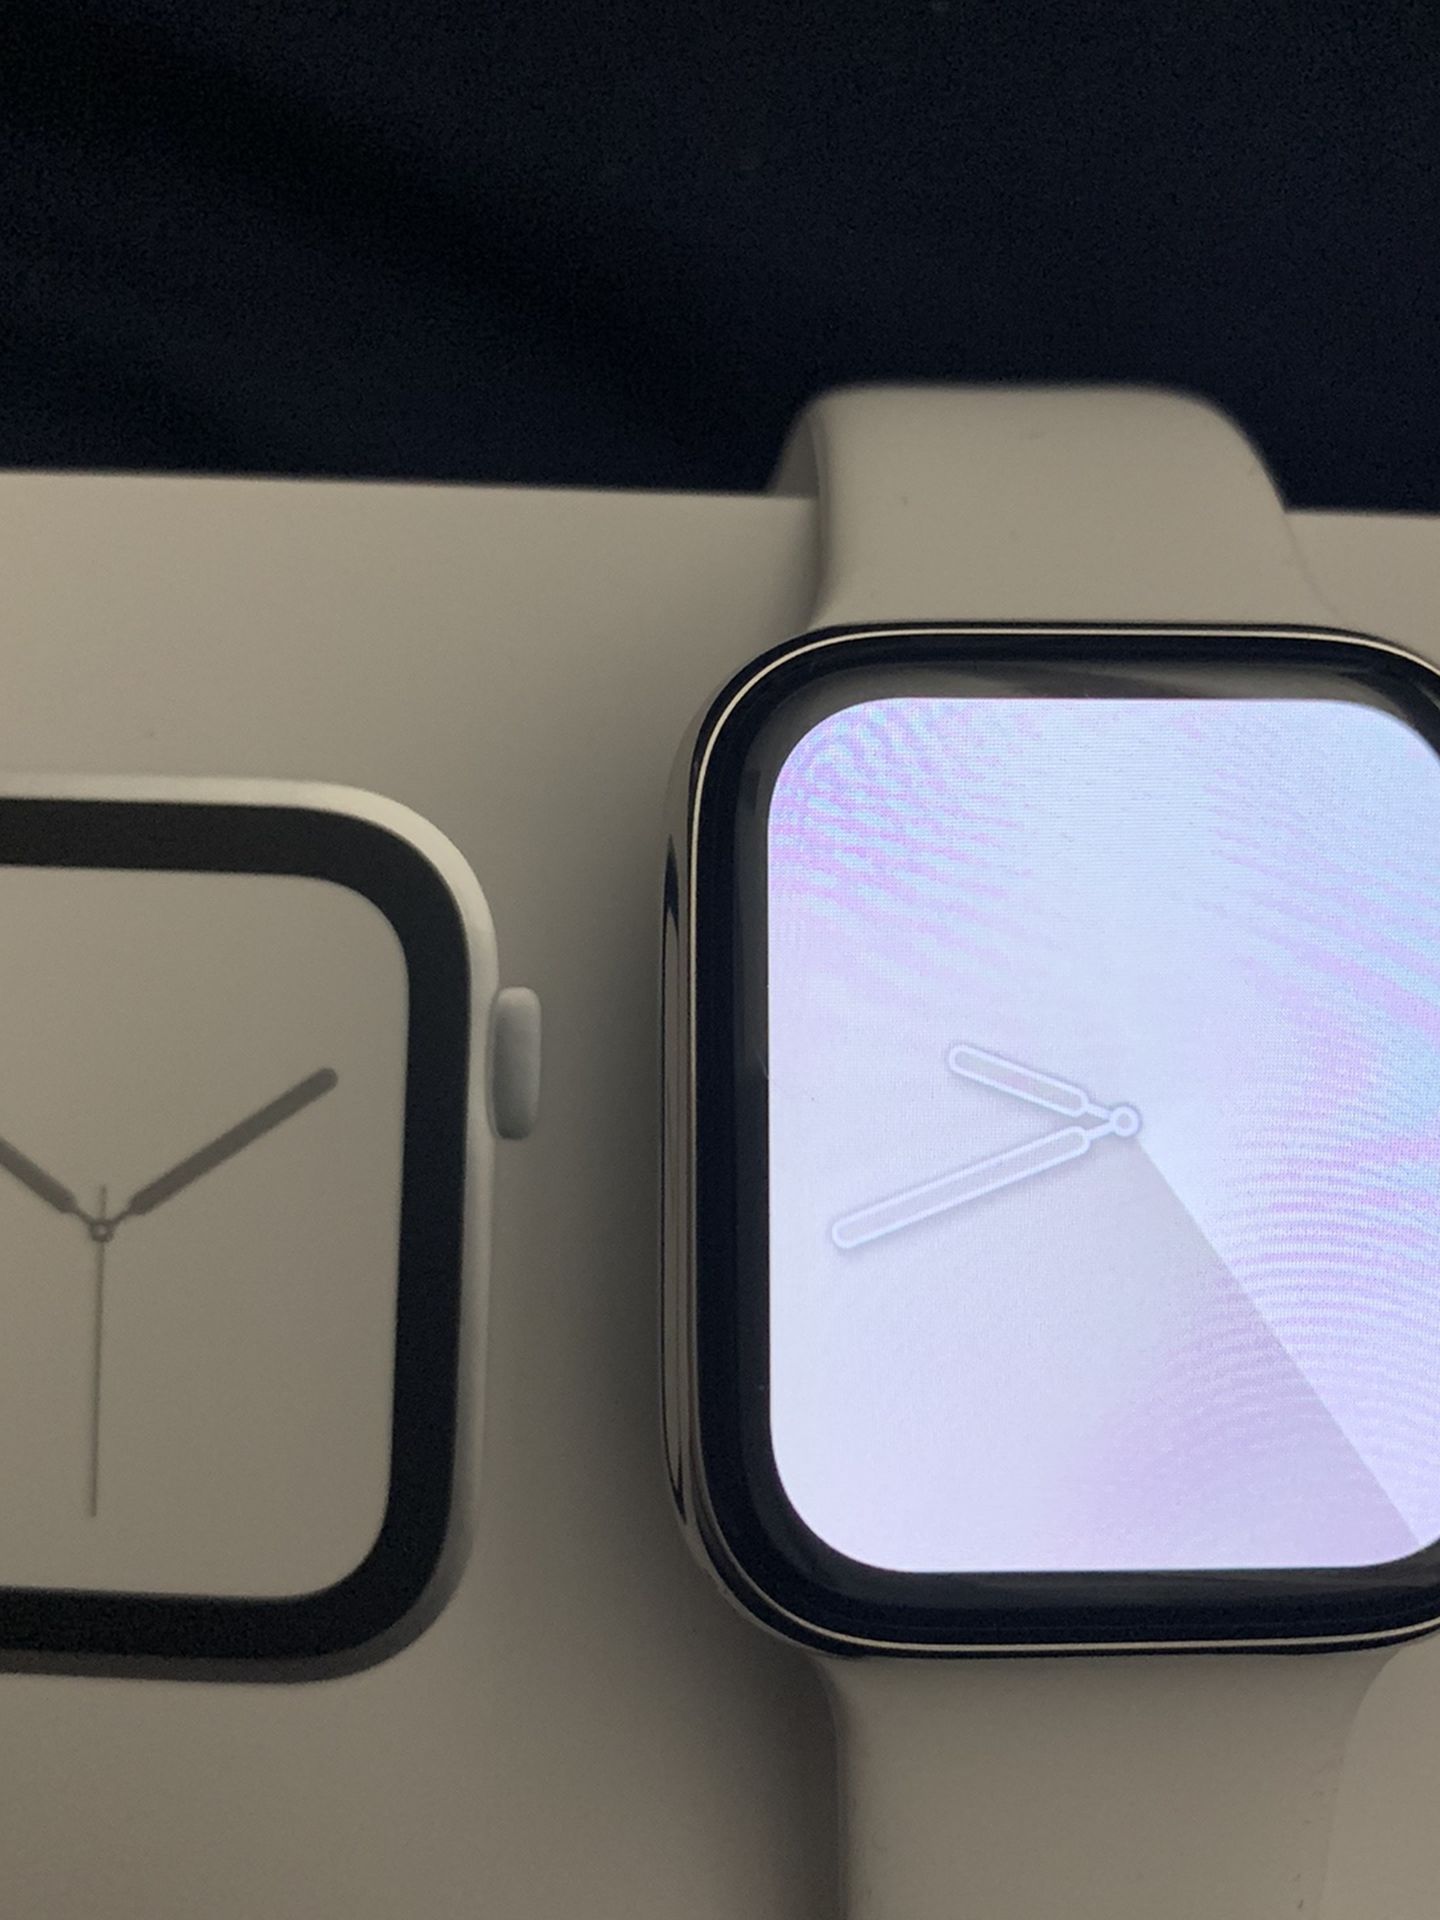 WOW Stainless Steel Series 4 Apple Watch 44mm LTE